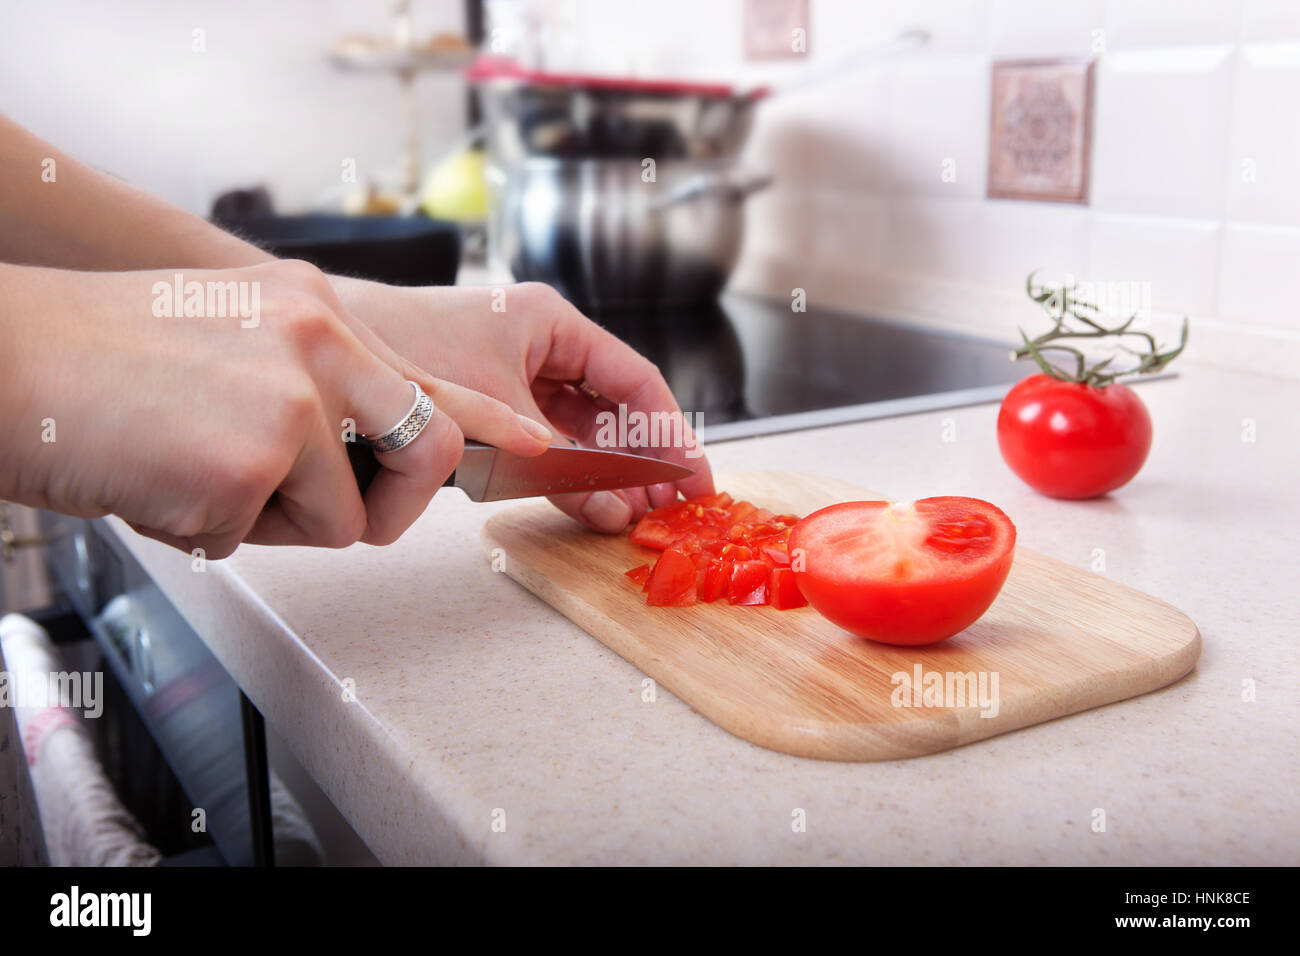 https://c8.alamy.com/comp/HNK8CE/woman-cuts-tomatoes-with-a-knife-on-the-kitchen-table-HNK8CE.jpg